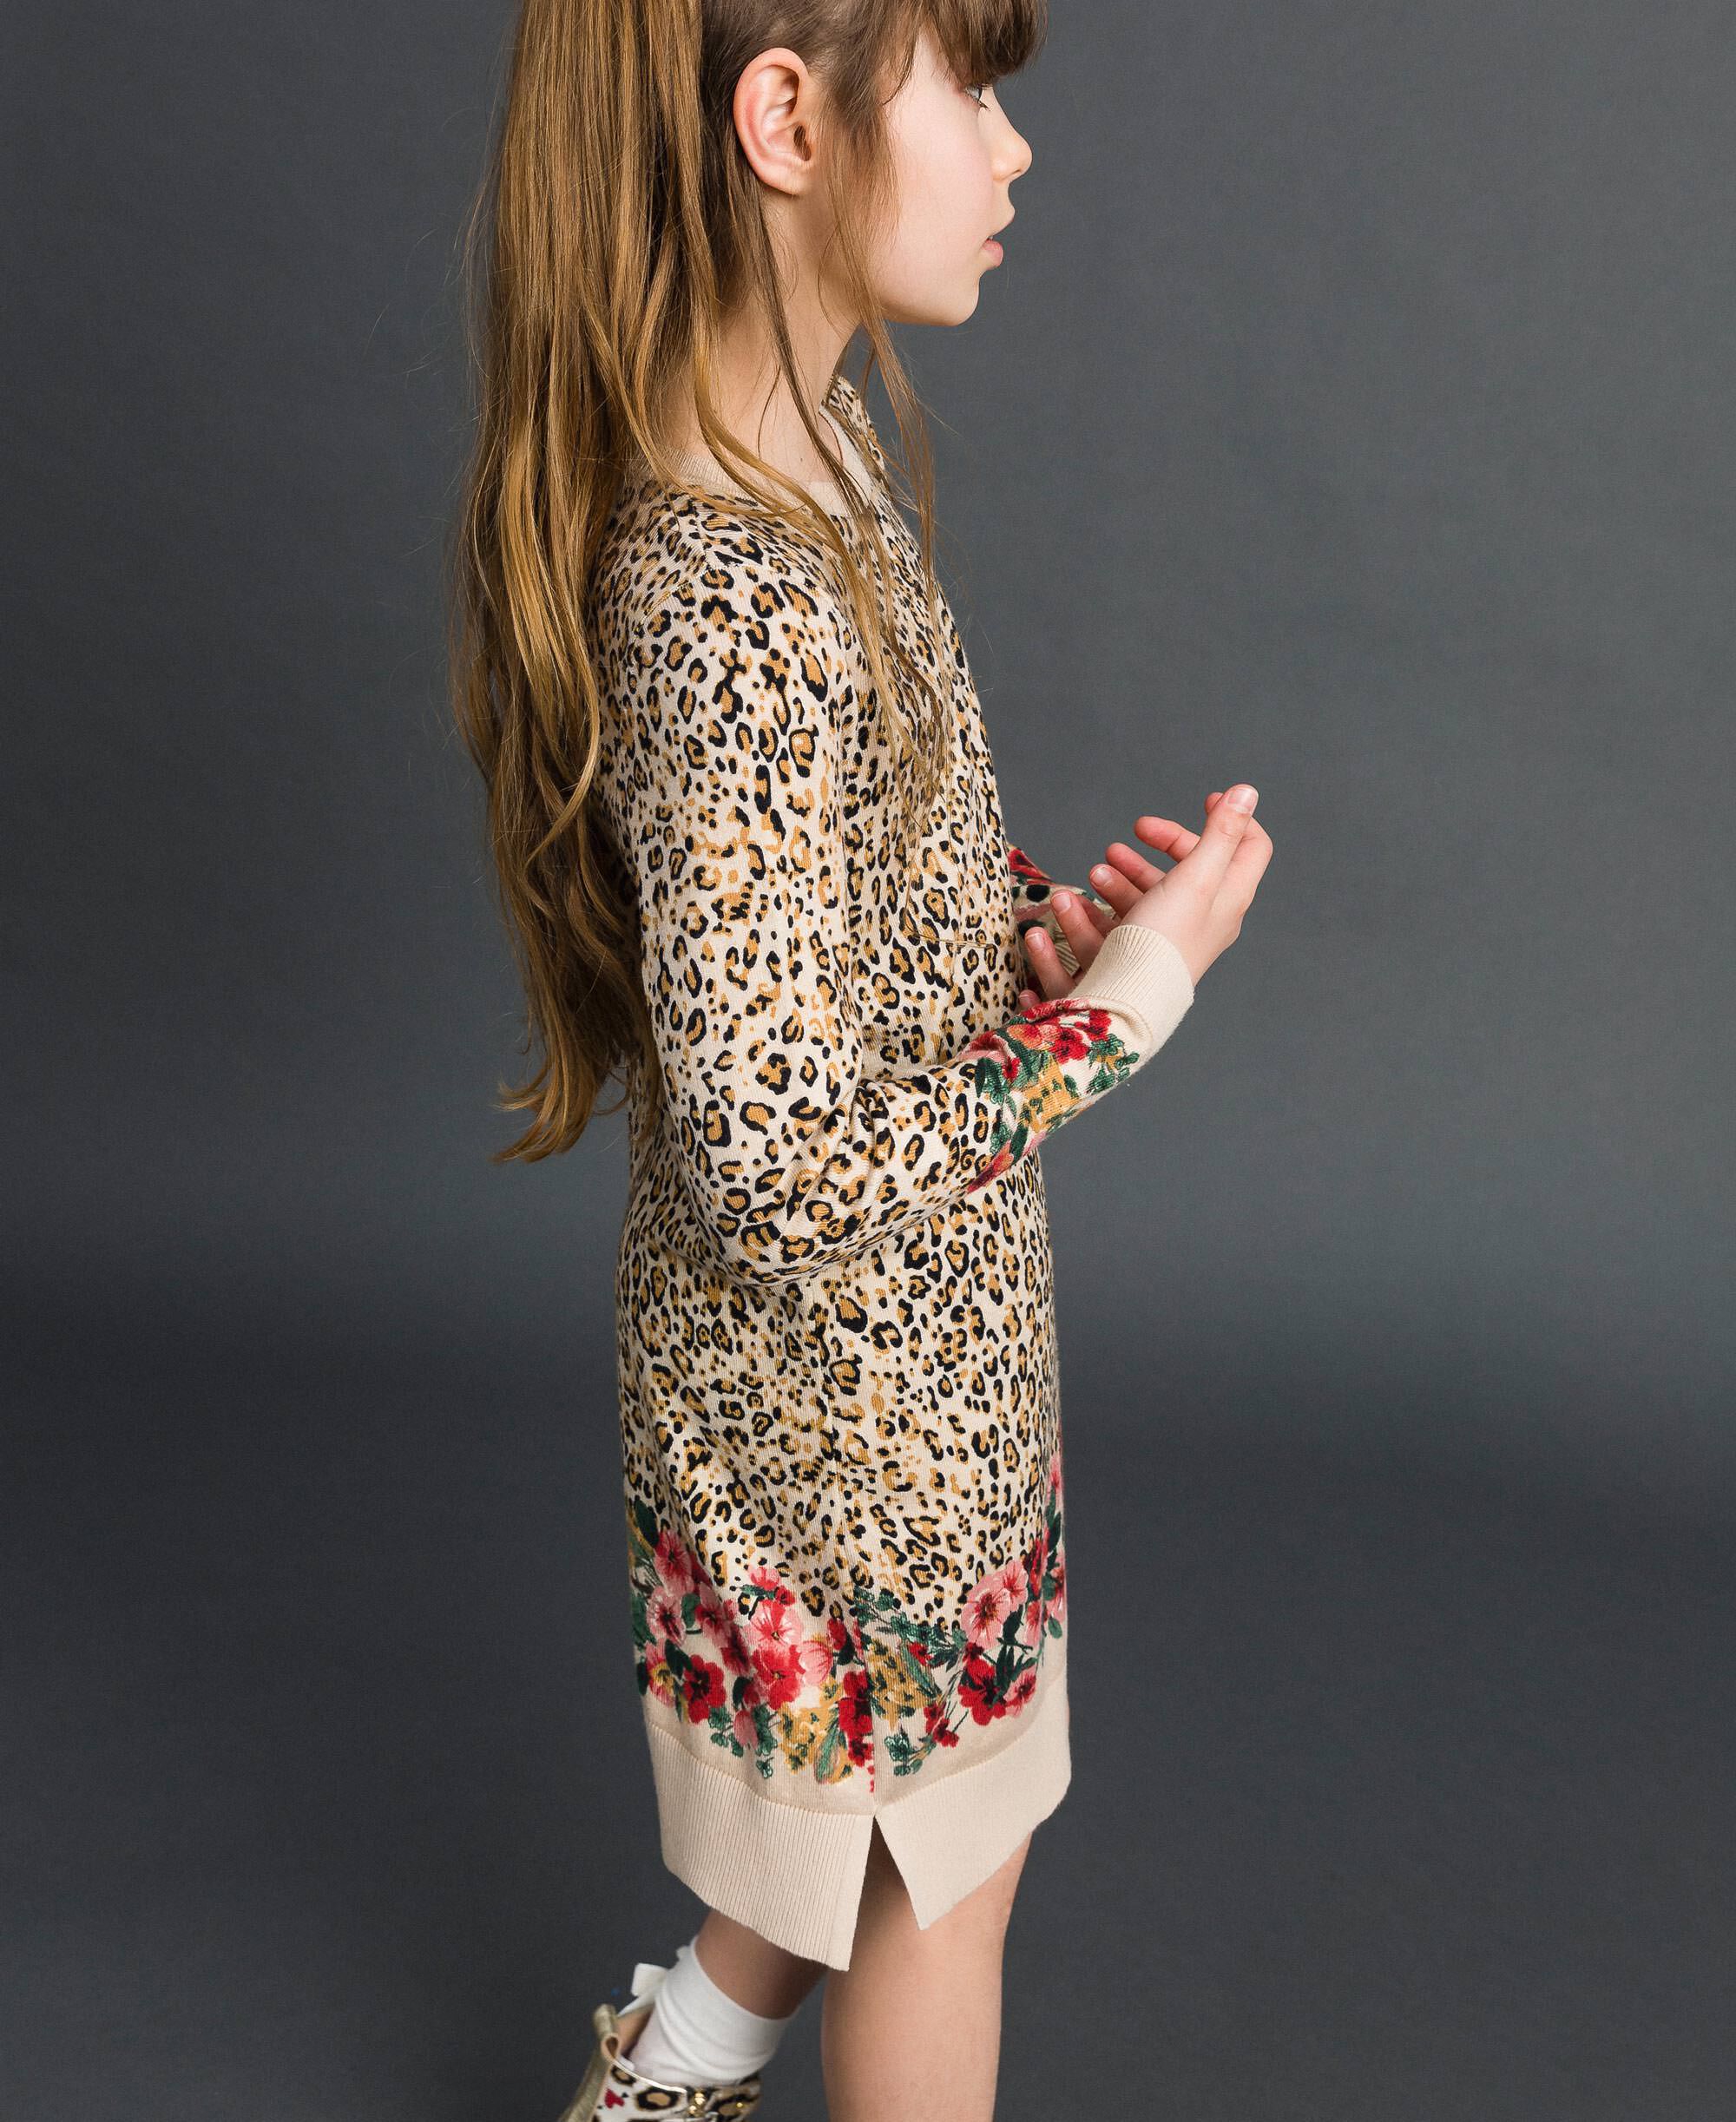 floral dress with leopard print sleeves